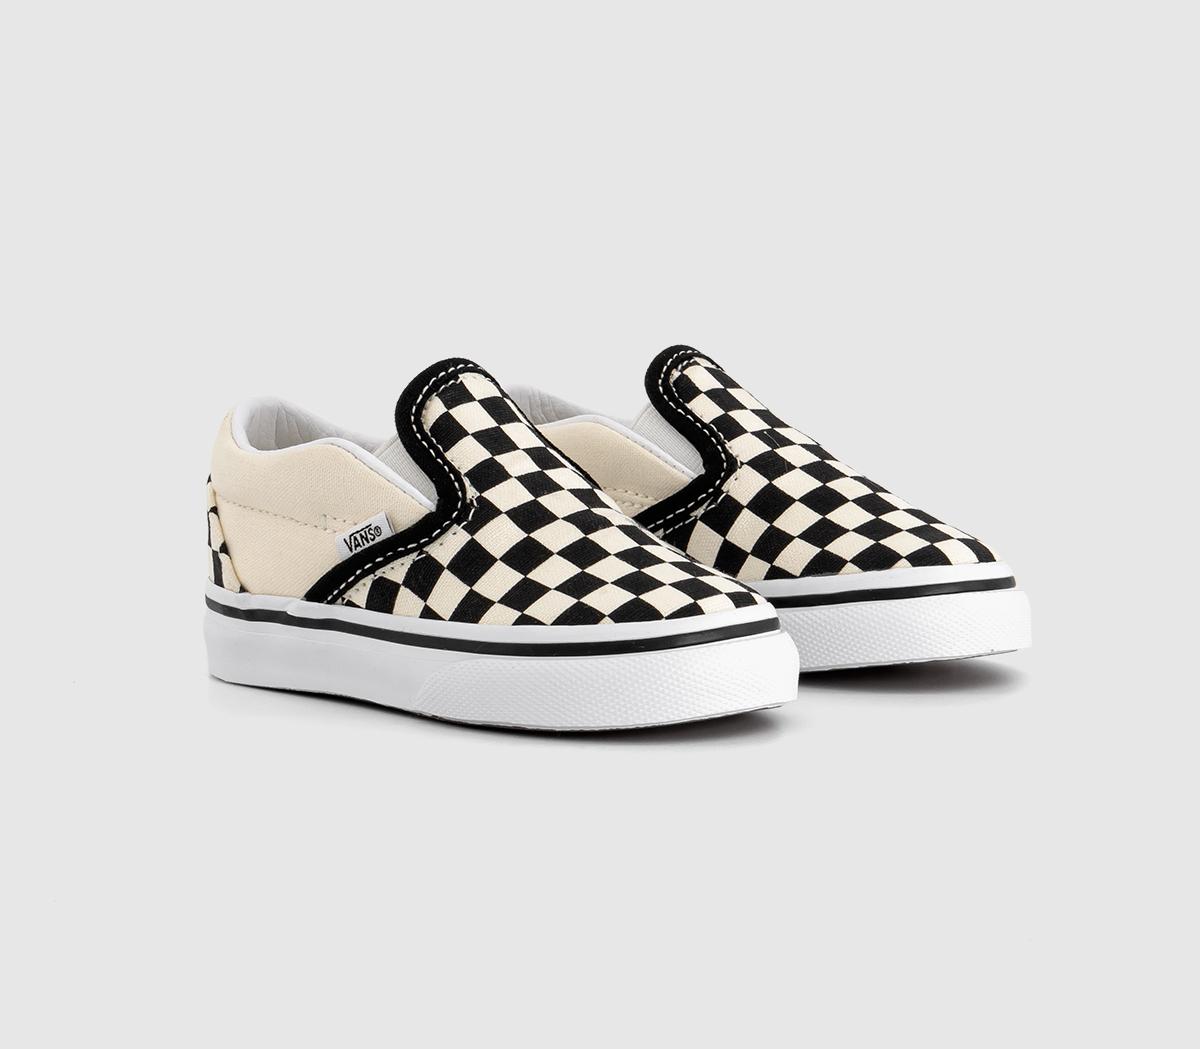 Vans Kids Toddlers Black And White Checkerboard Classic Slip On Trainers, Size: 6 Infant